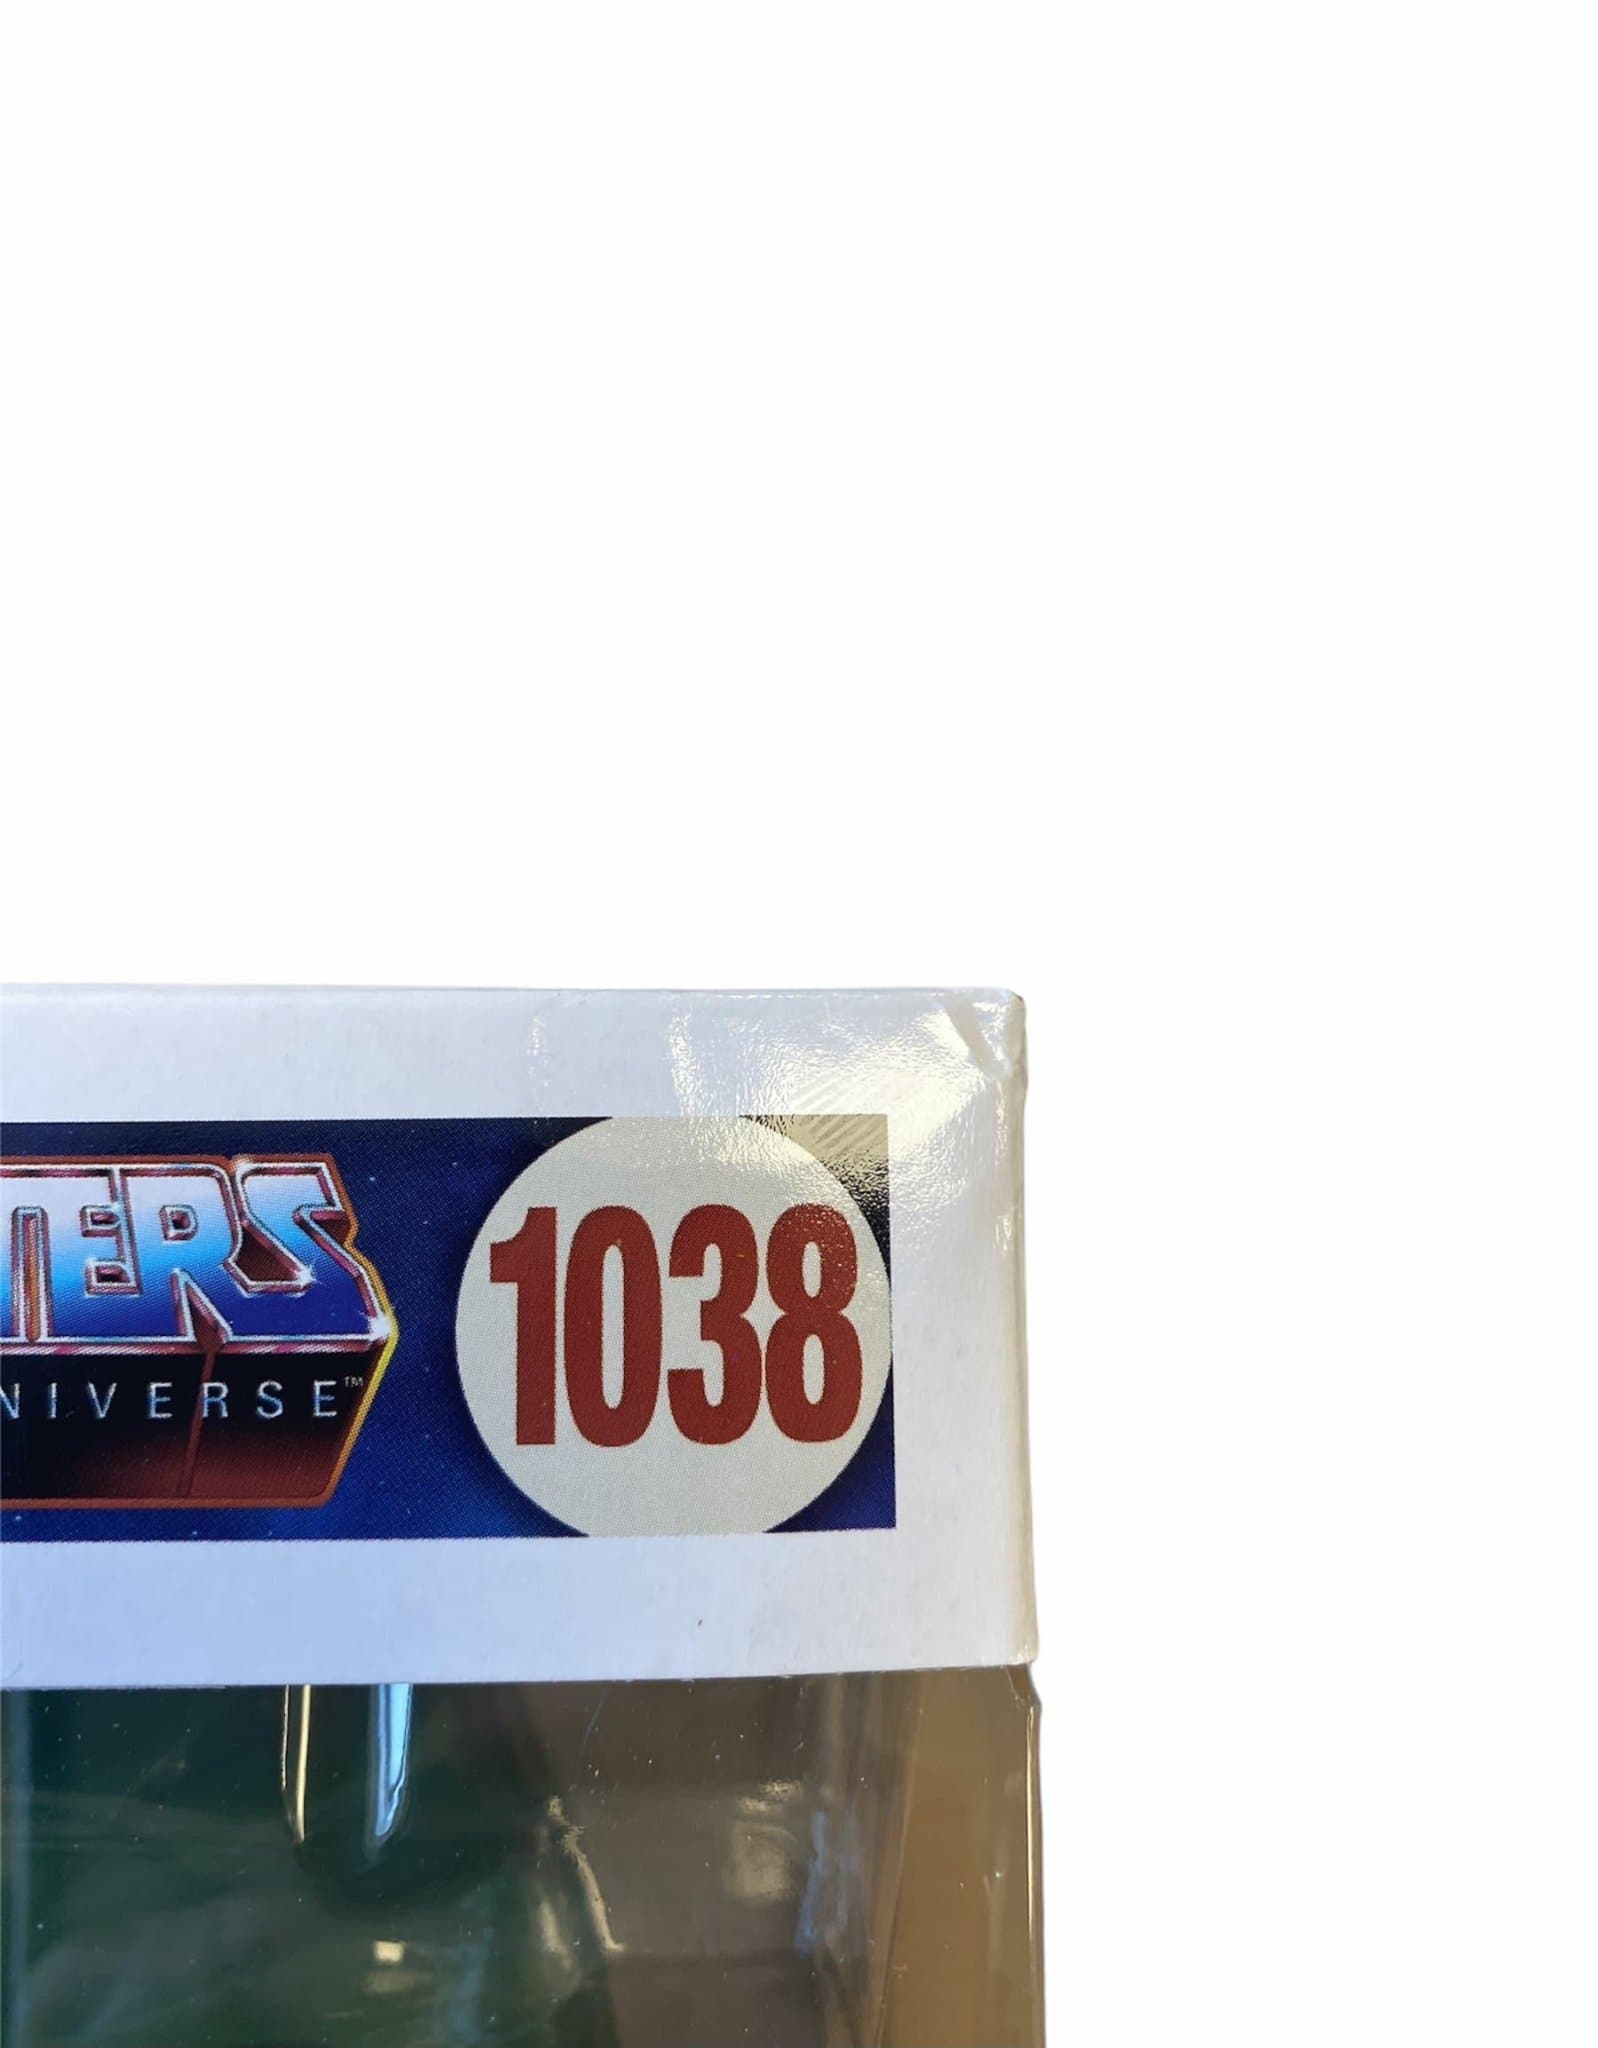 King Hiss #1038 Funko Pop! Masters Of The Universe. NYCC 2020 Exclusive. Condition 8/10 - Pop Figures